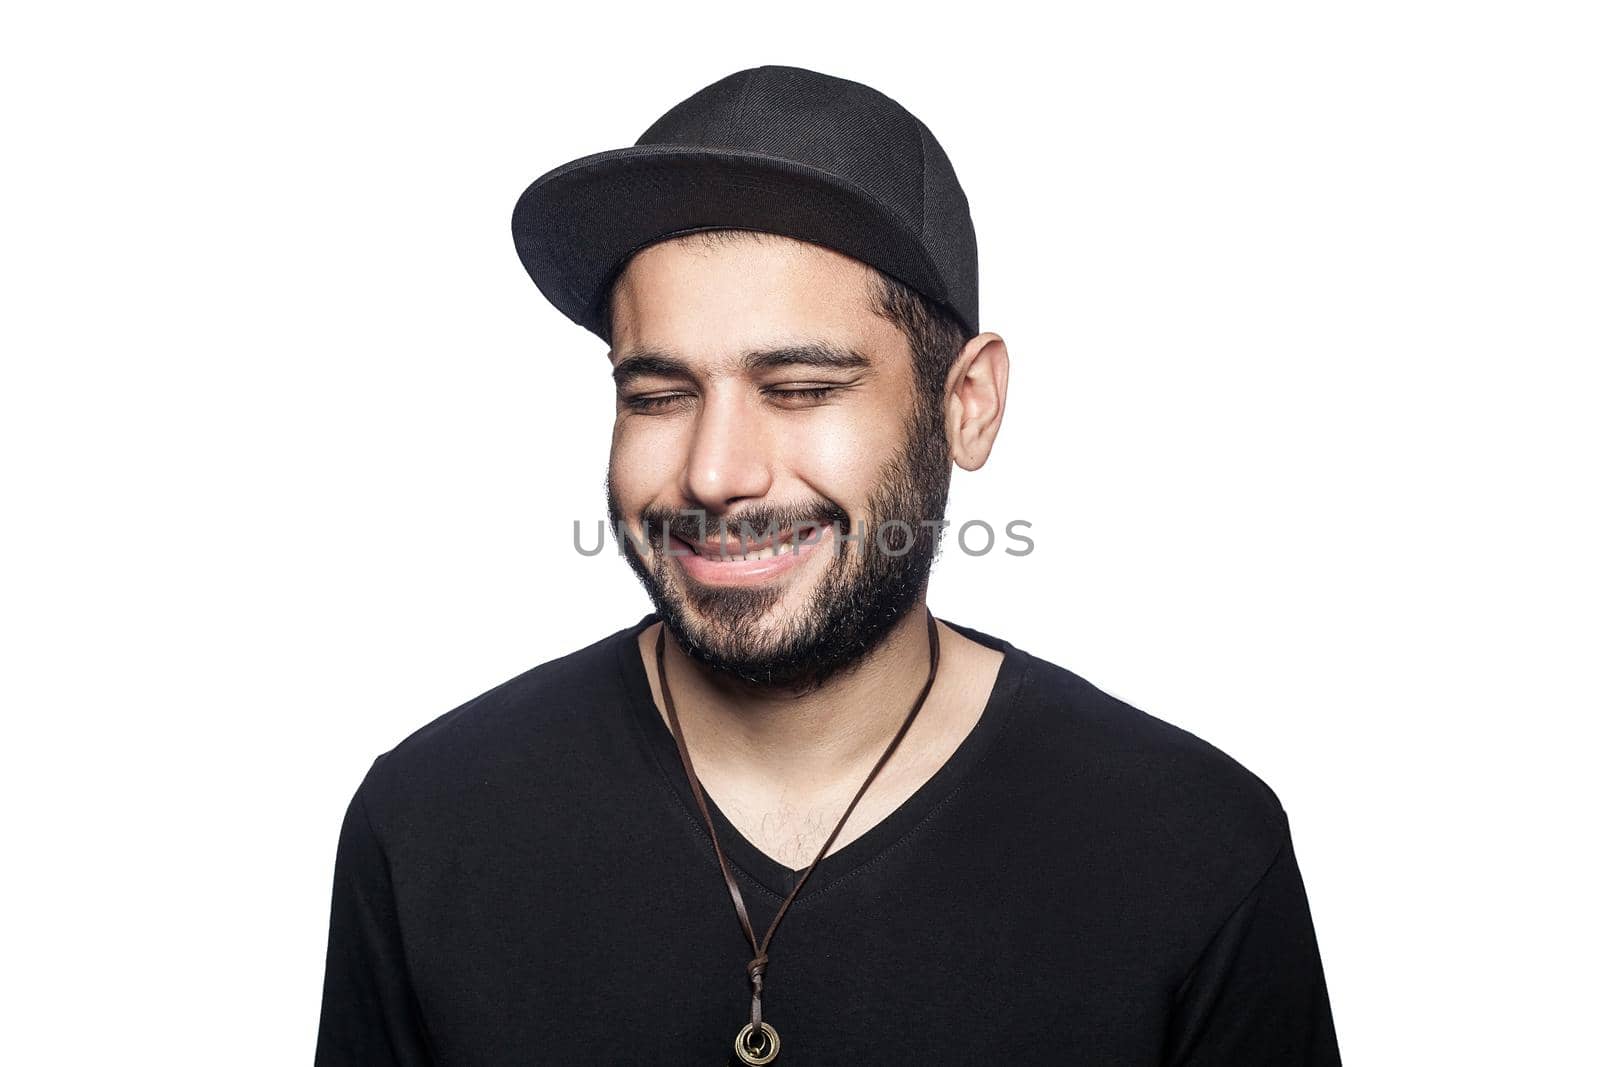 emotional man in black shirt and cap on white background by Khosro1